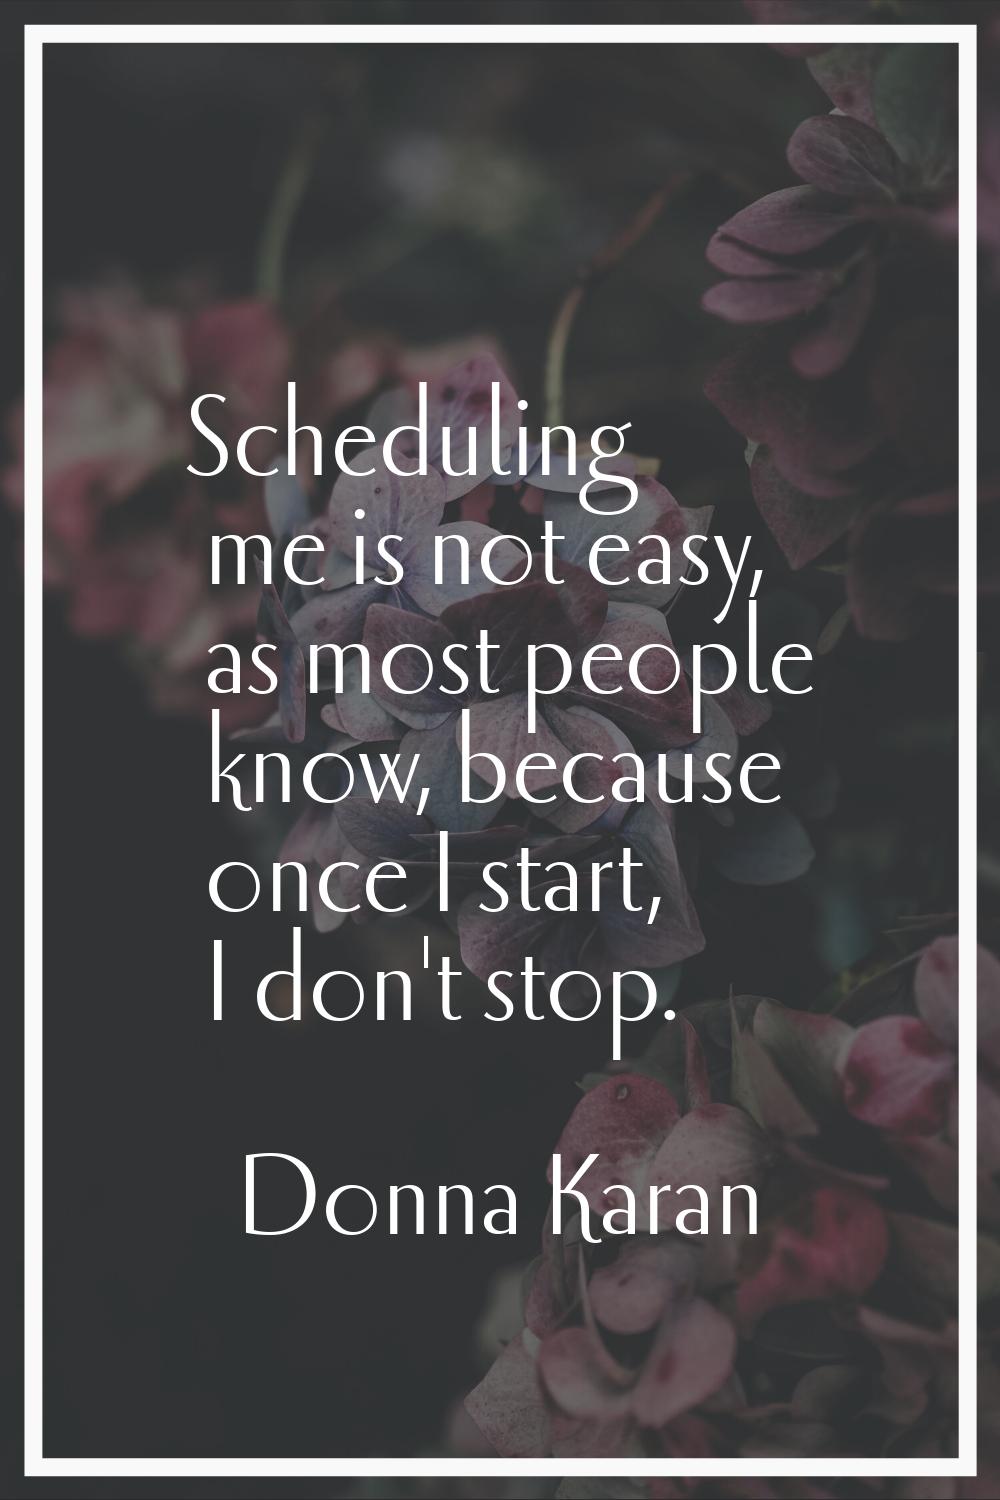 Scheduling me is not easy, as most people know, because once I start, I don't stop.